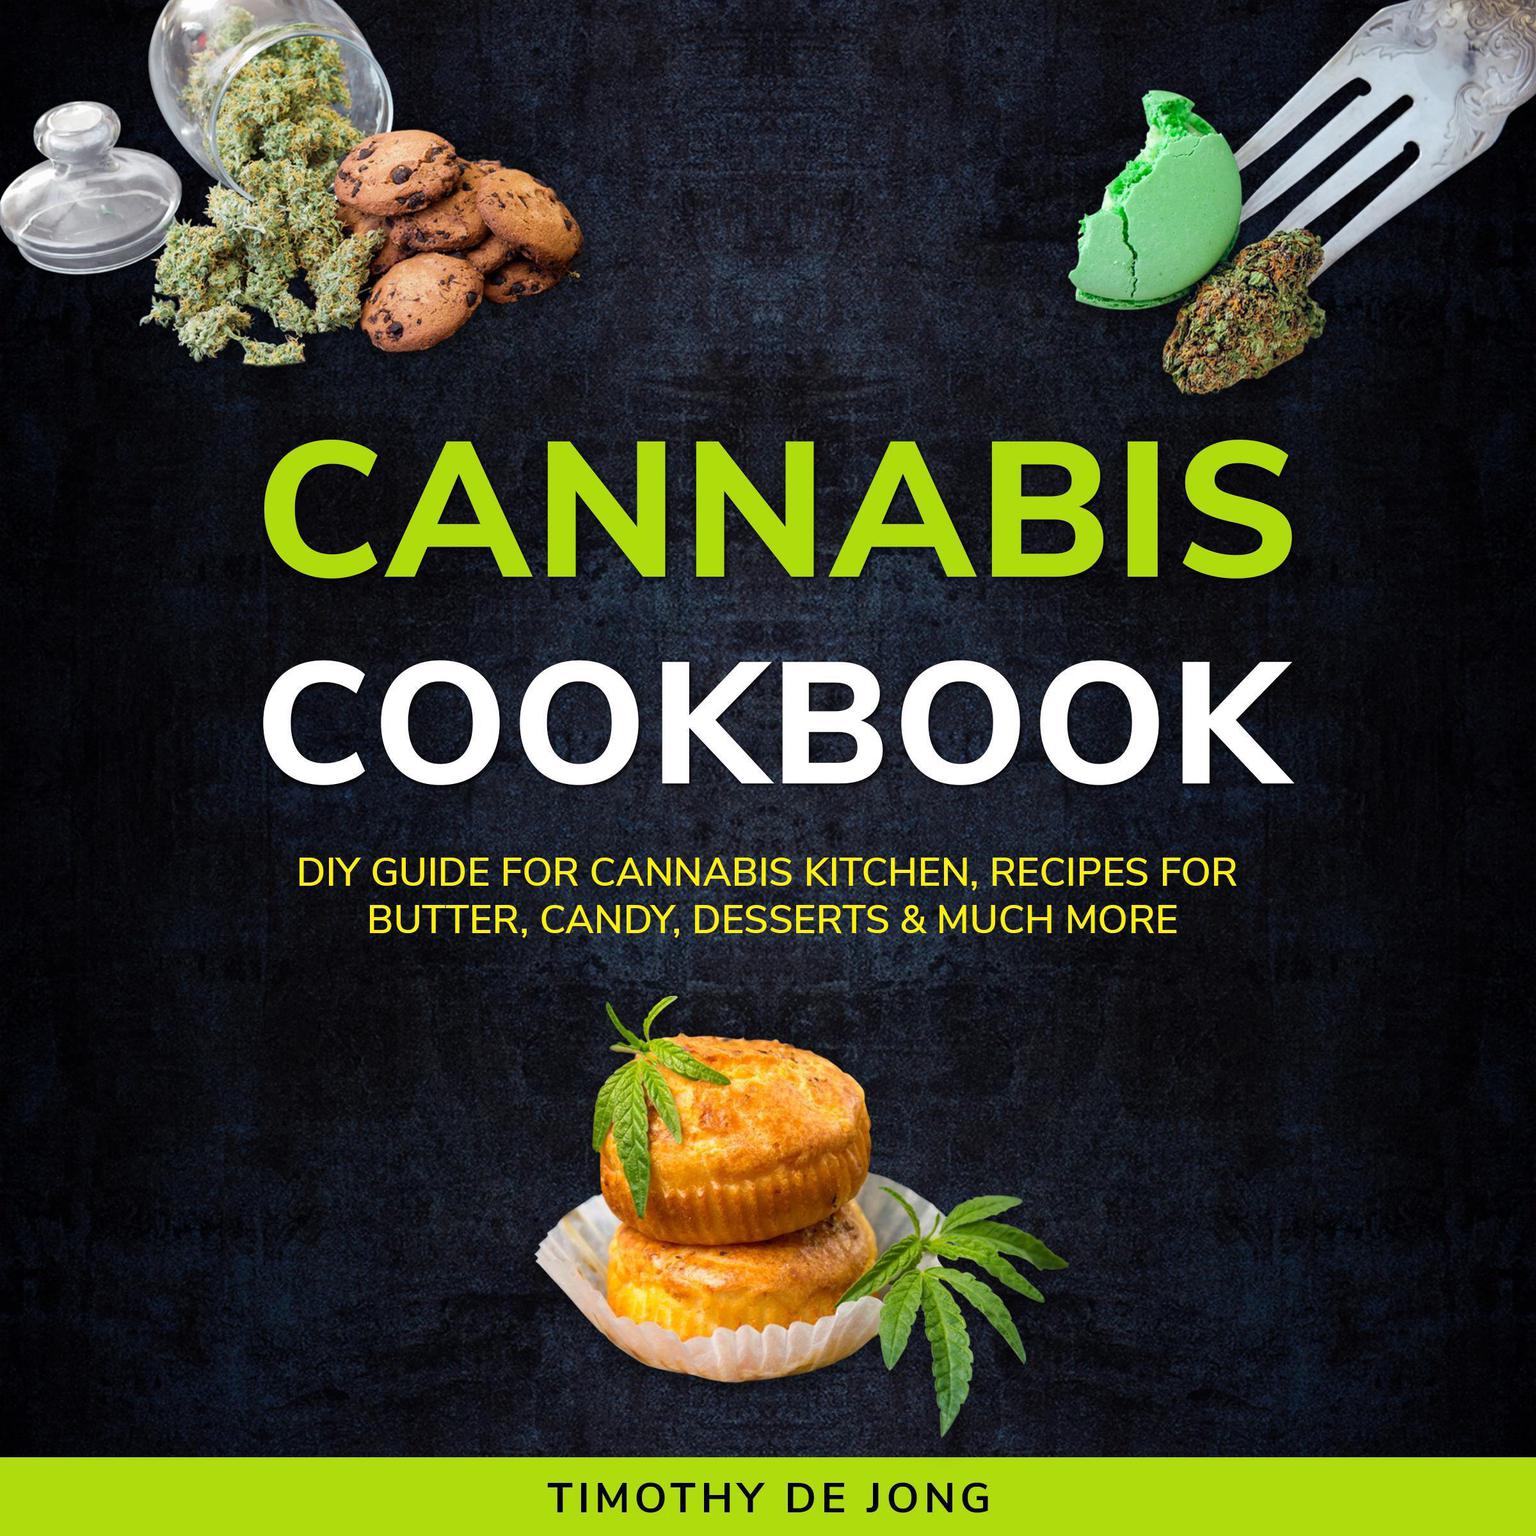 CANNABIS COOKBOOK: DIY Guide for Cannabis Kitchen, Recipes for Butter, Candy, Desserts & Much More  Audiobook, by Timothy De Jong